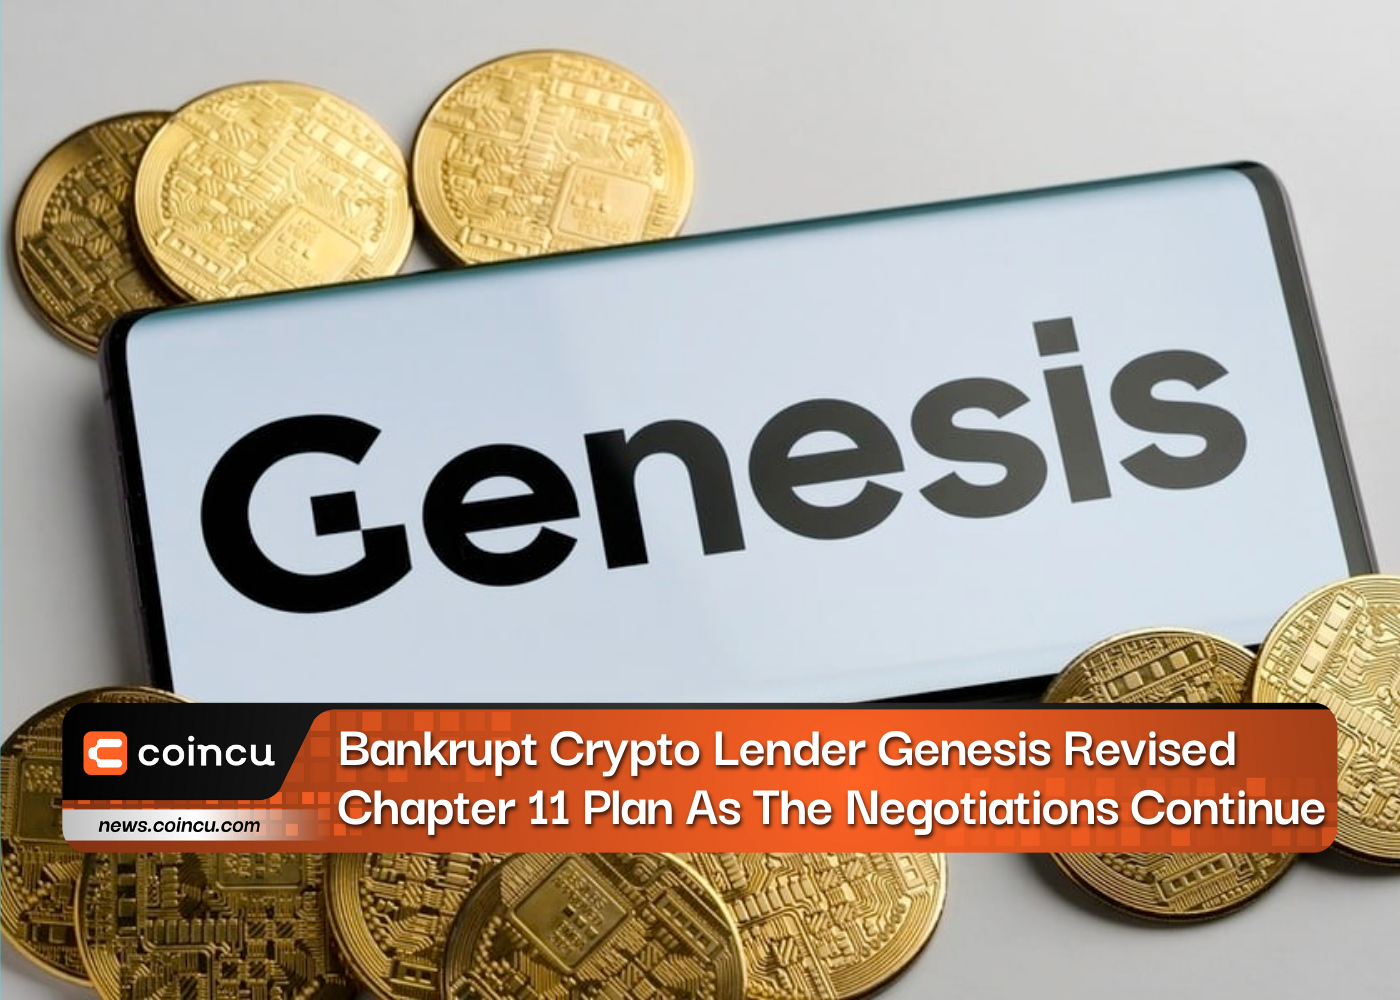 Bankrupt Crypto Lender Genesis Revised Chapter 11 Plan As The Negotiations Continue